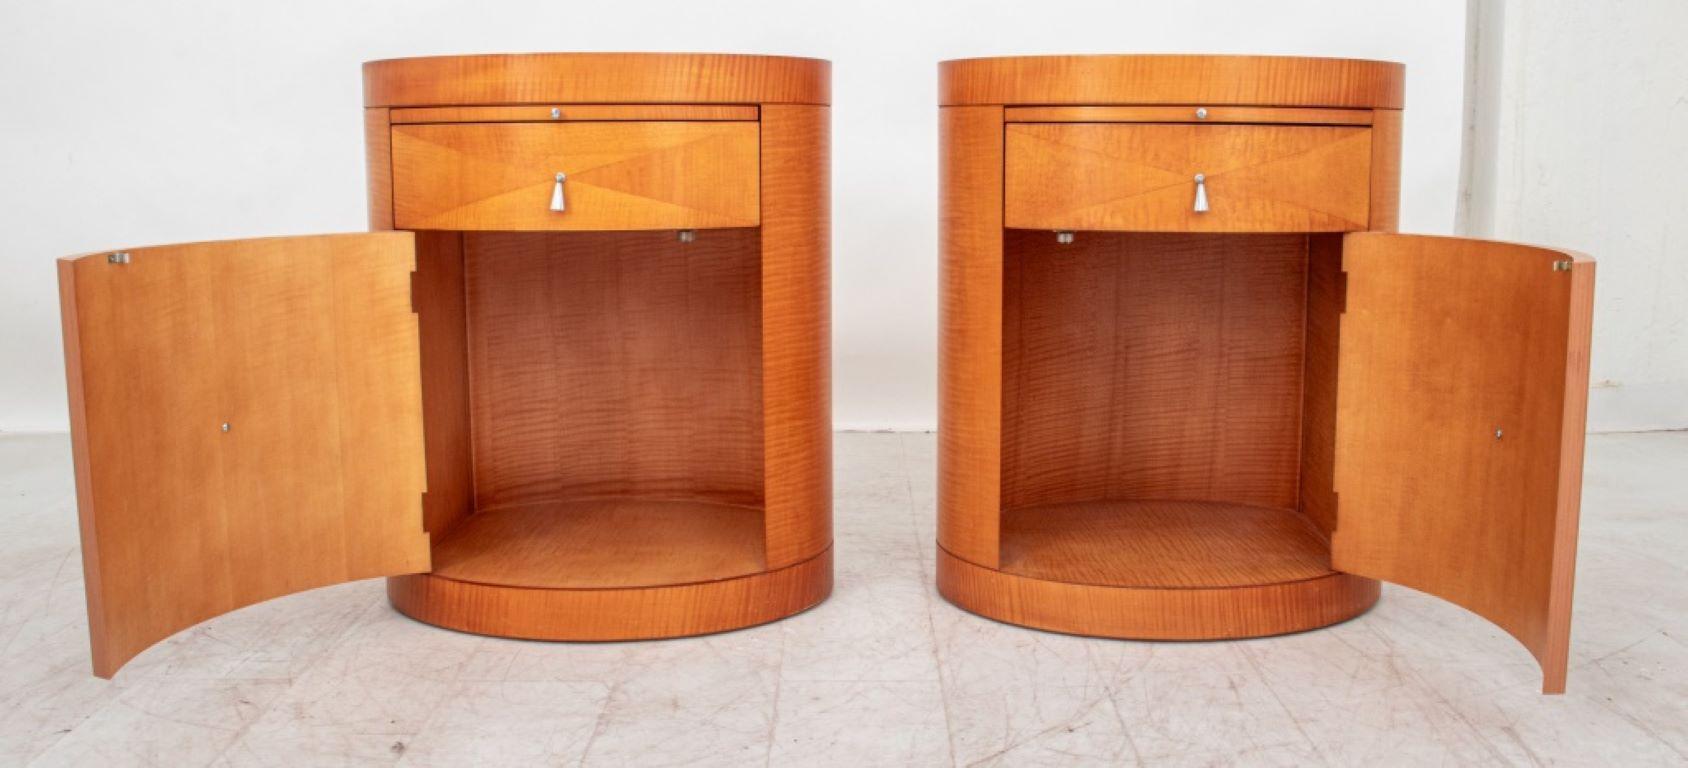 Baker Parquetry Maple Oval Side Tables, Pair, possibly lamp or beside tables.

Dealer: S138XX